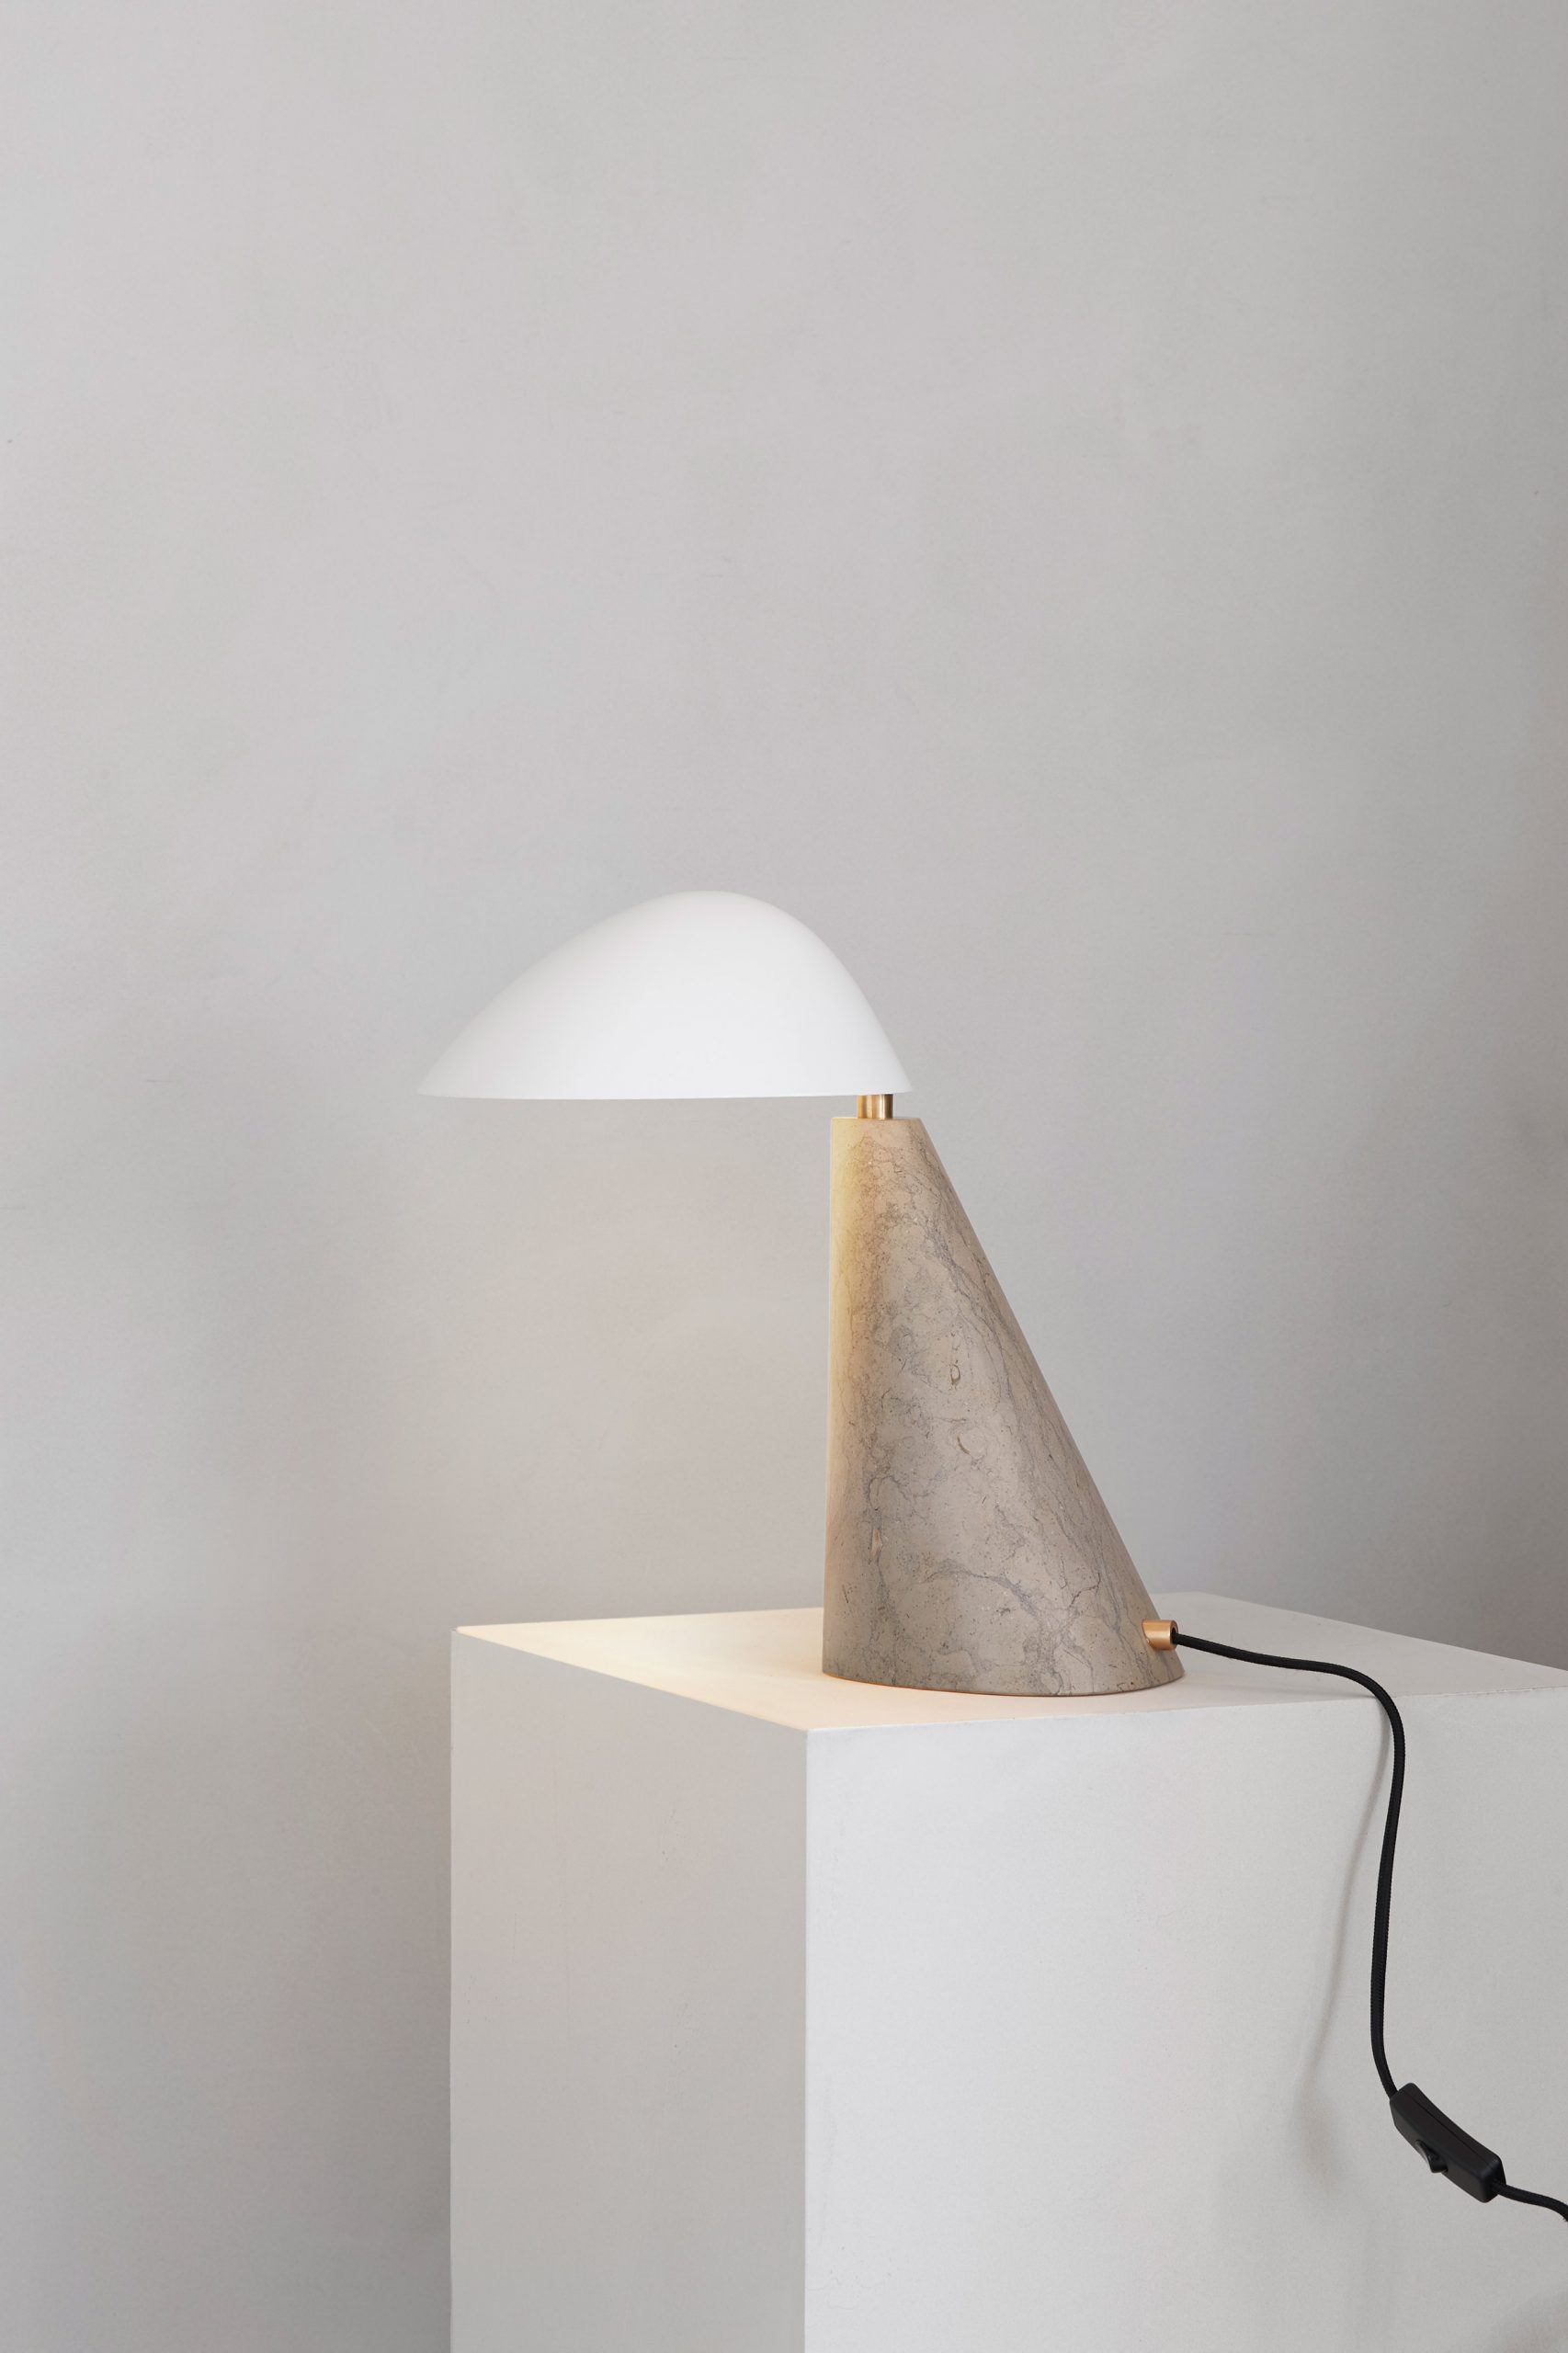 Space Copenhagen's sculptural Fellow Lamp for the Complements collection by Fredericia